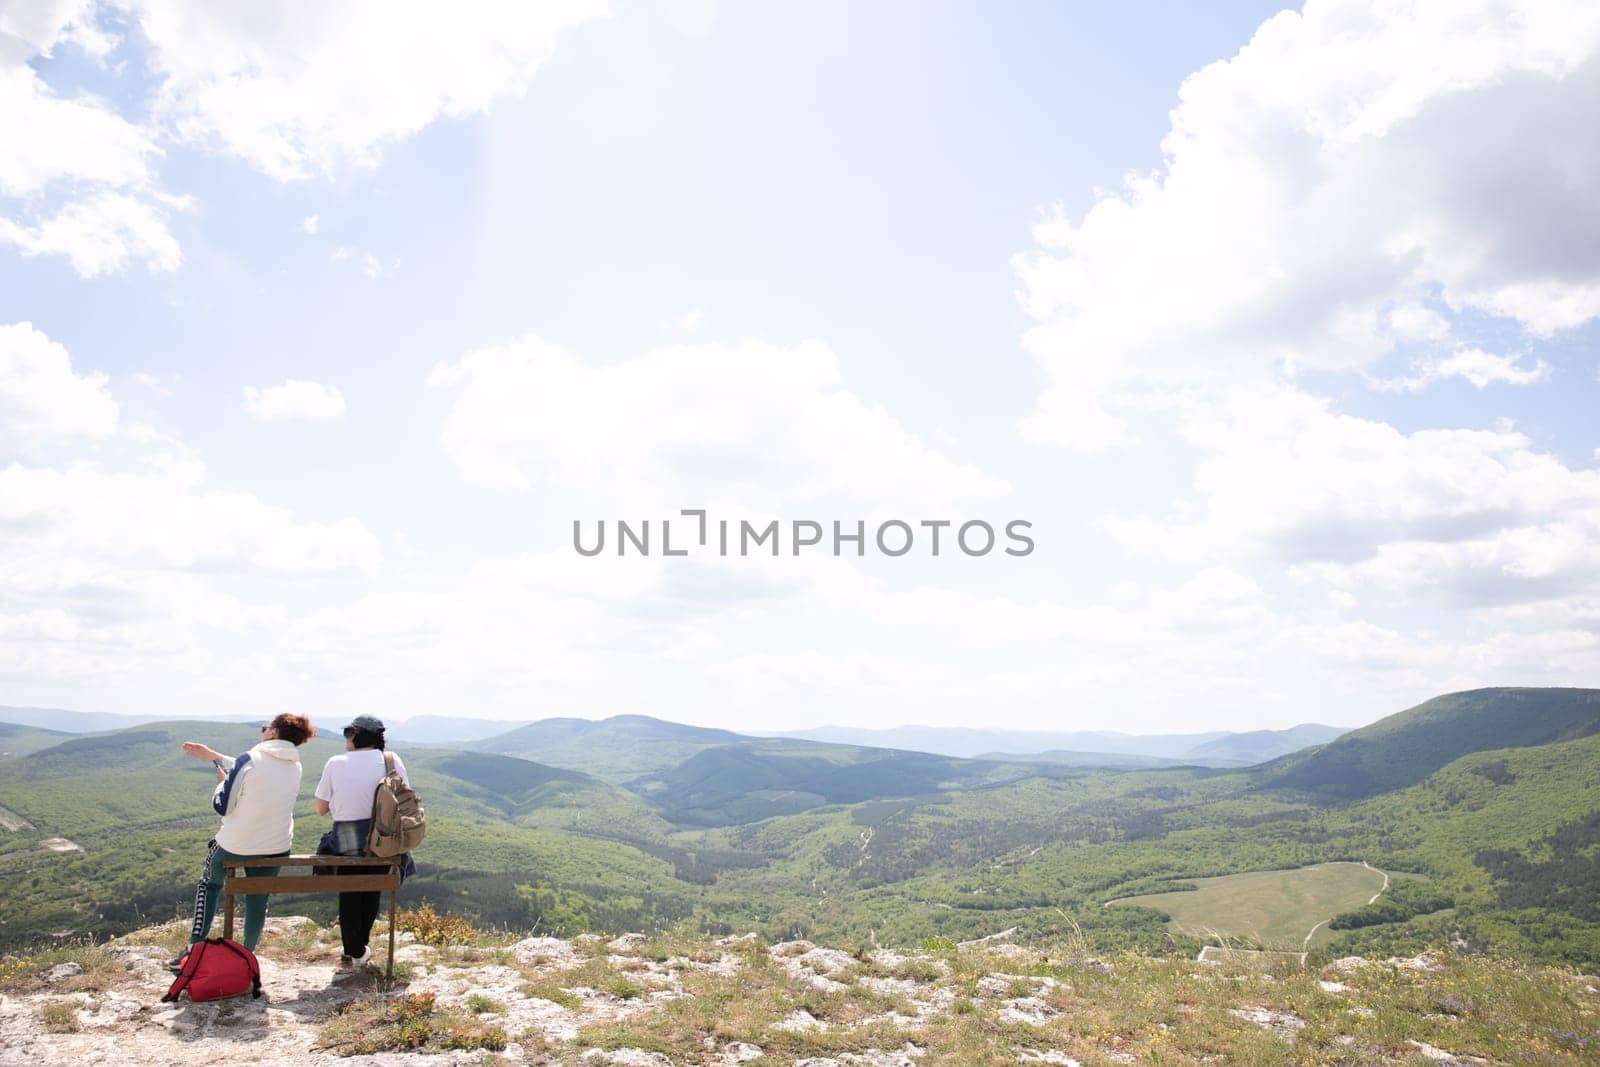 two people sitting on bench on a mountain hiking journey nature